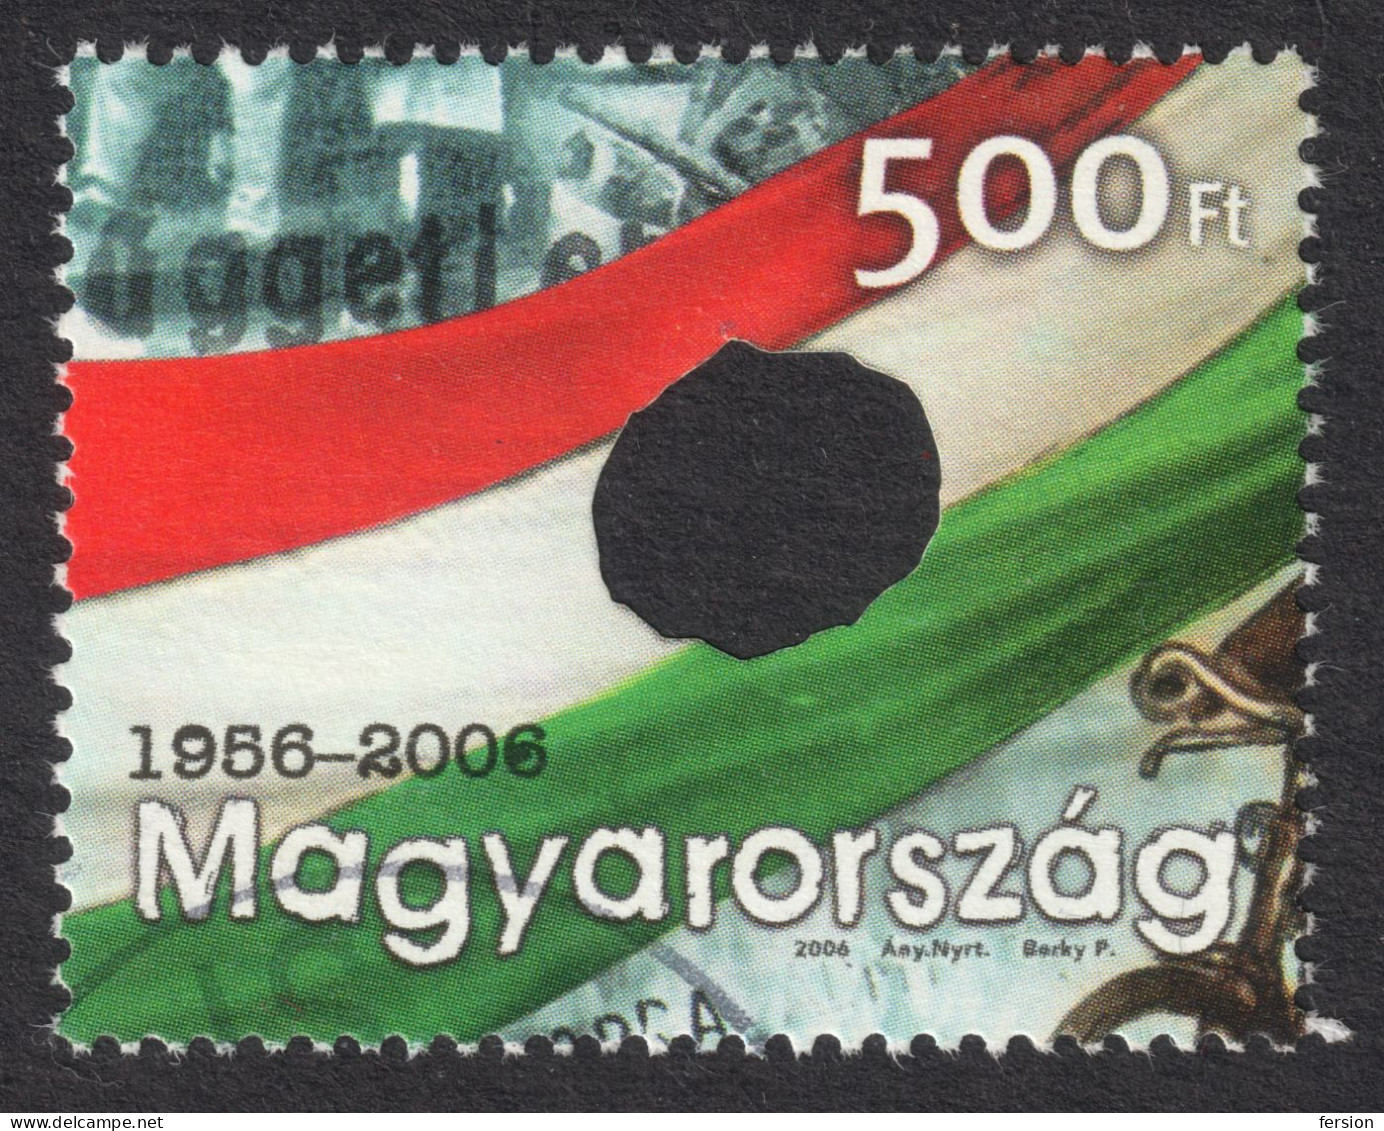 FLAG Tricolor / Stalin MONUMENT RUINS Flag 2006 Hungary 1956 Against CCCP Russia Revolution - Used Stamps